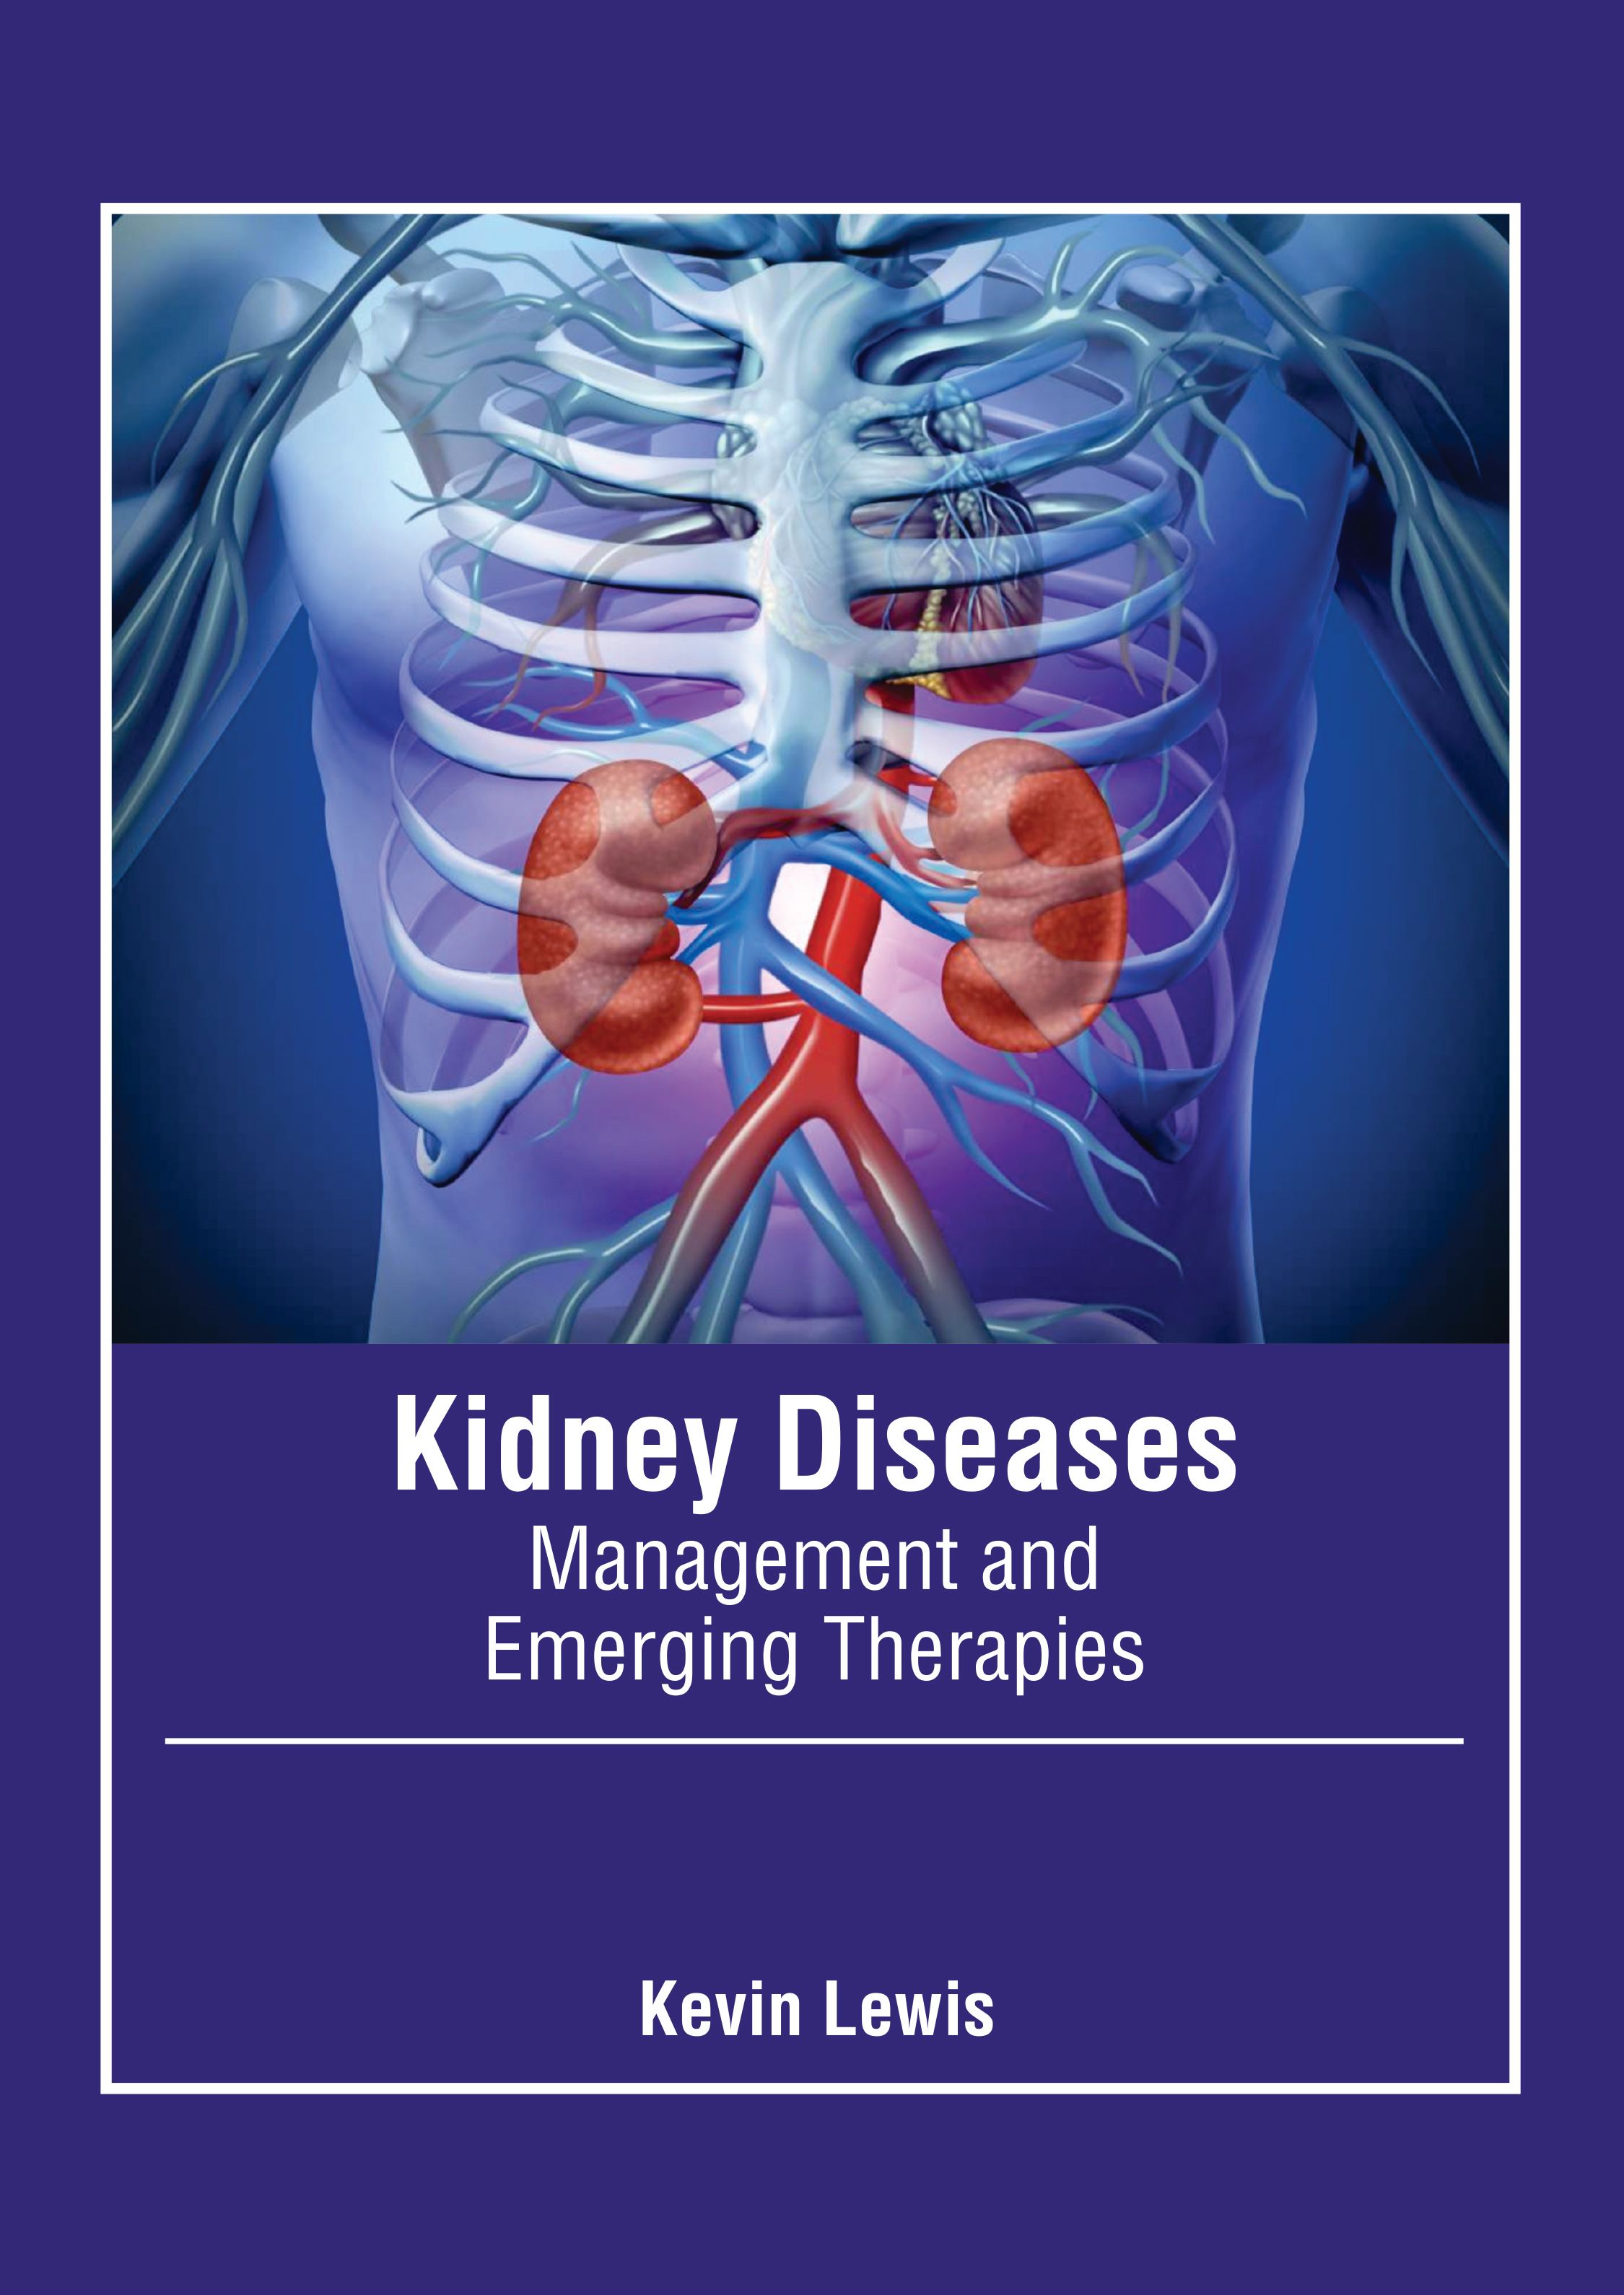 KIDNEY DISEASES: MANAGEMENT AND EMERGING THERAPIES